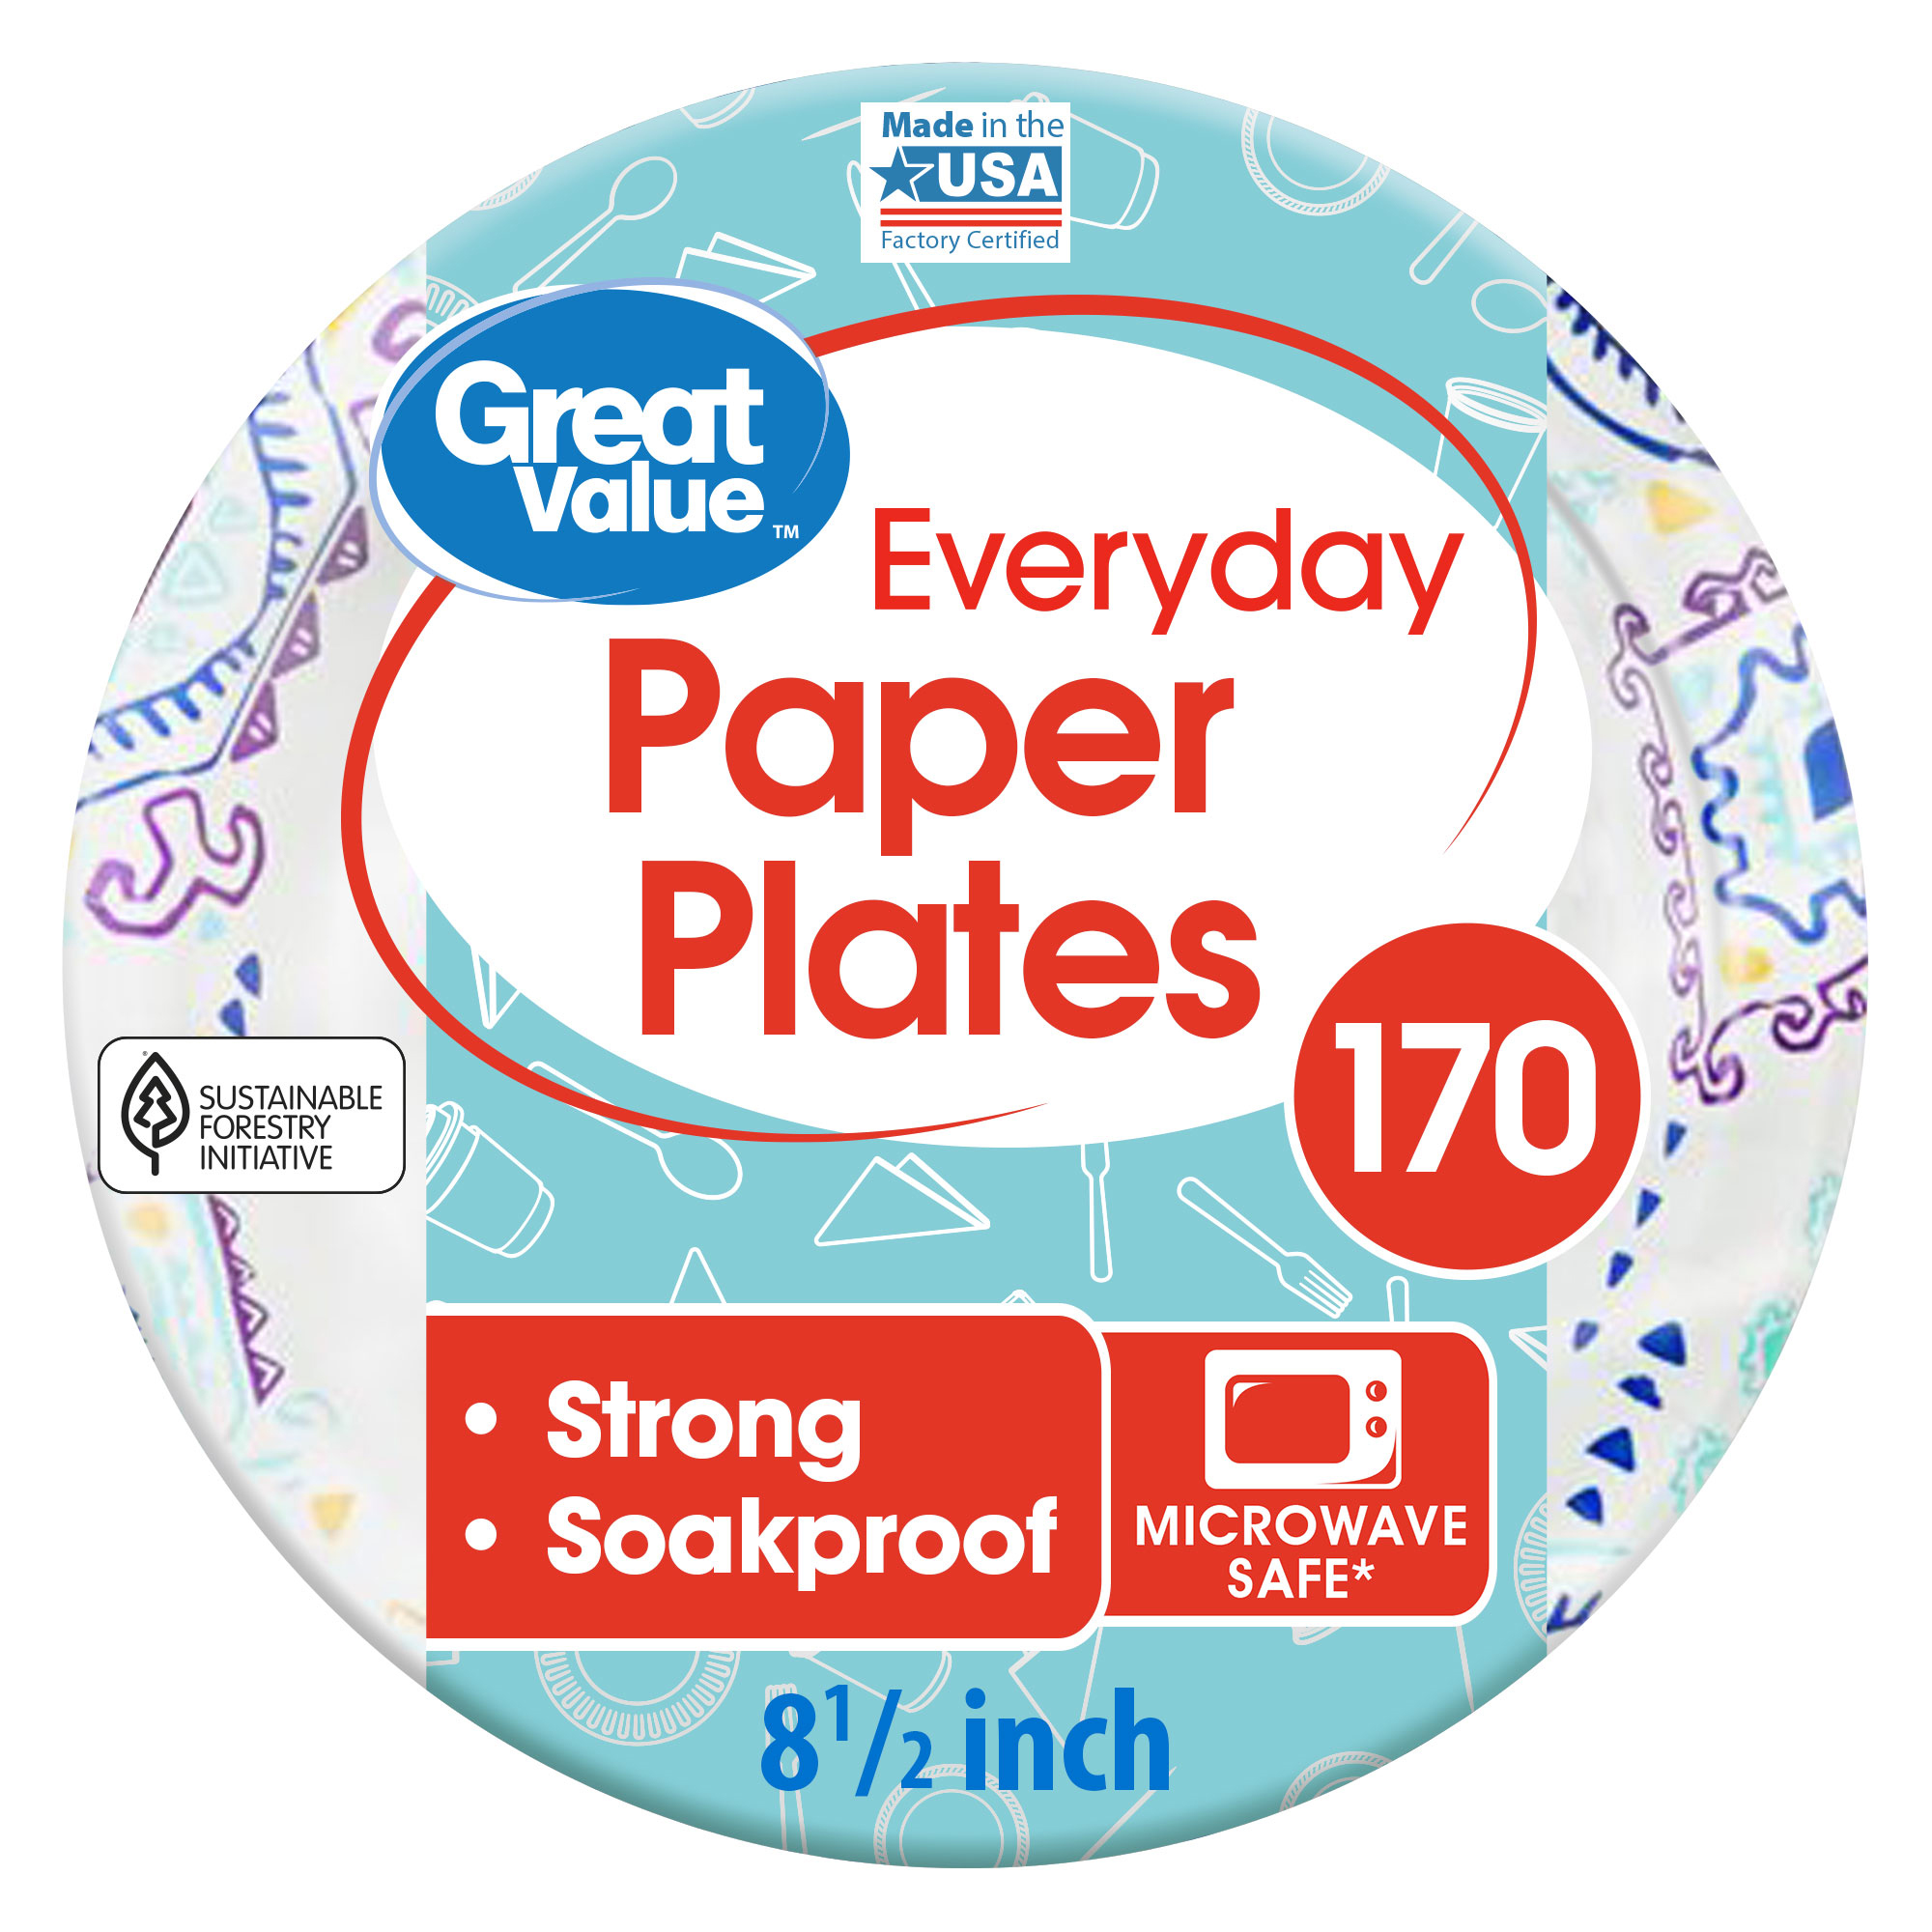 Great Value Everyday Paper Plates, 8.5", 170 Count - image 1 of 9